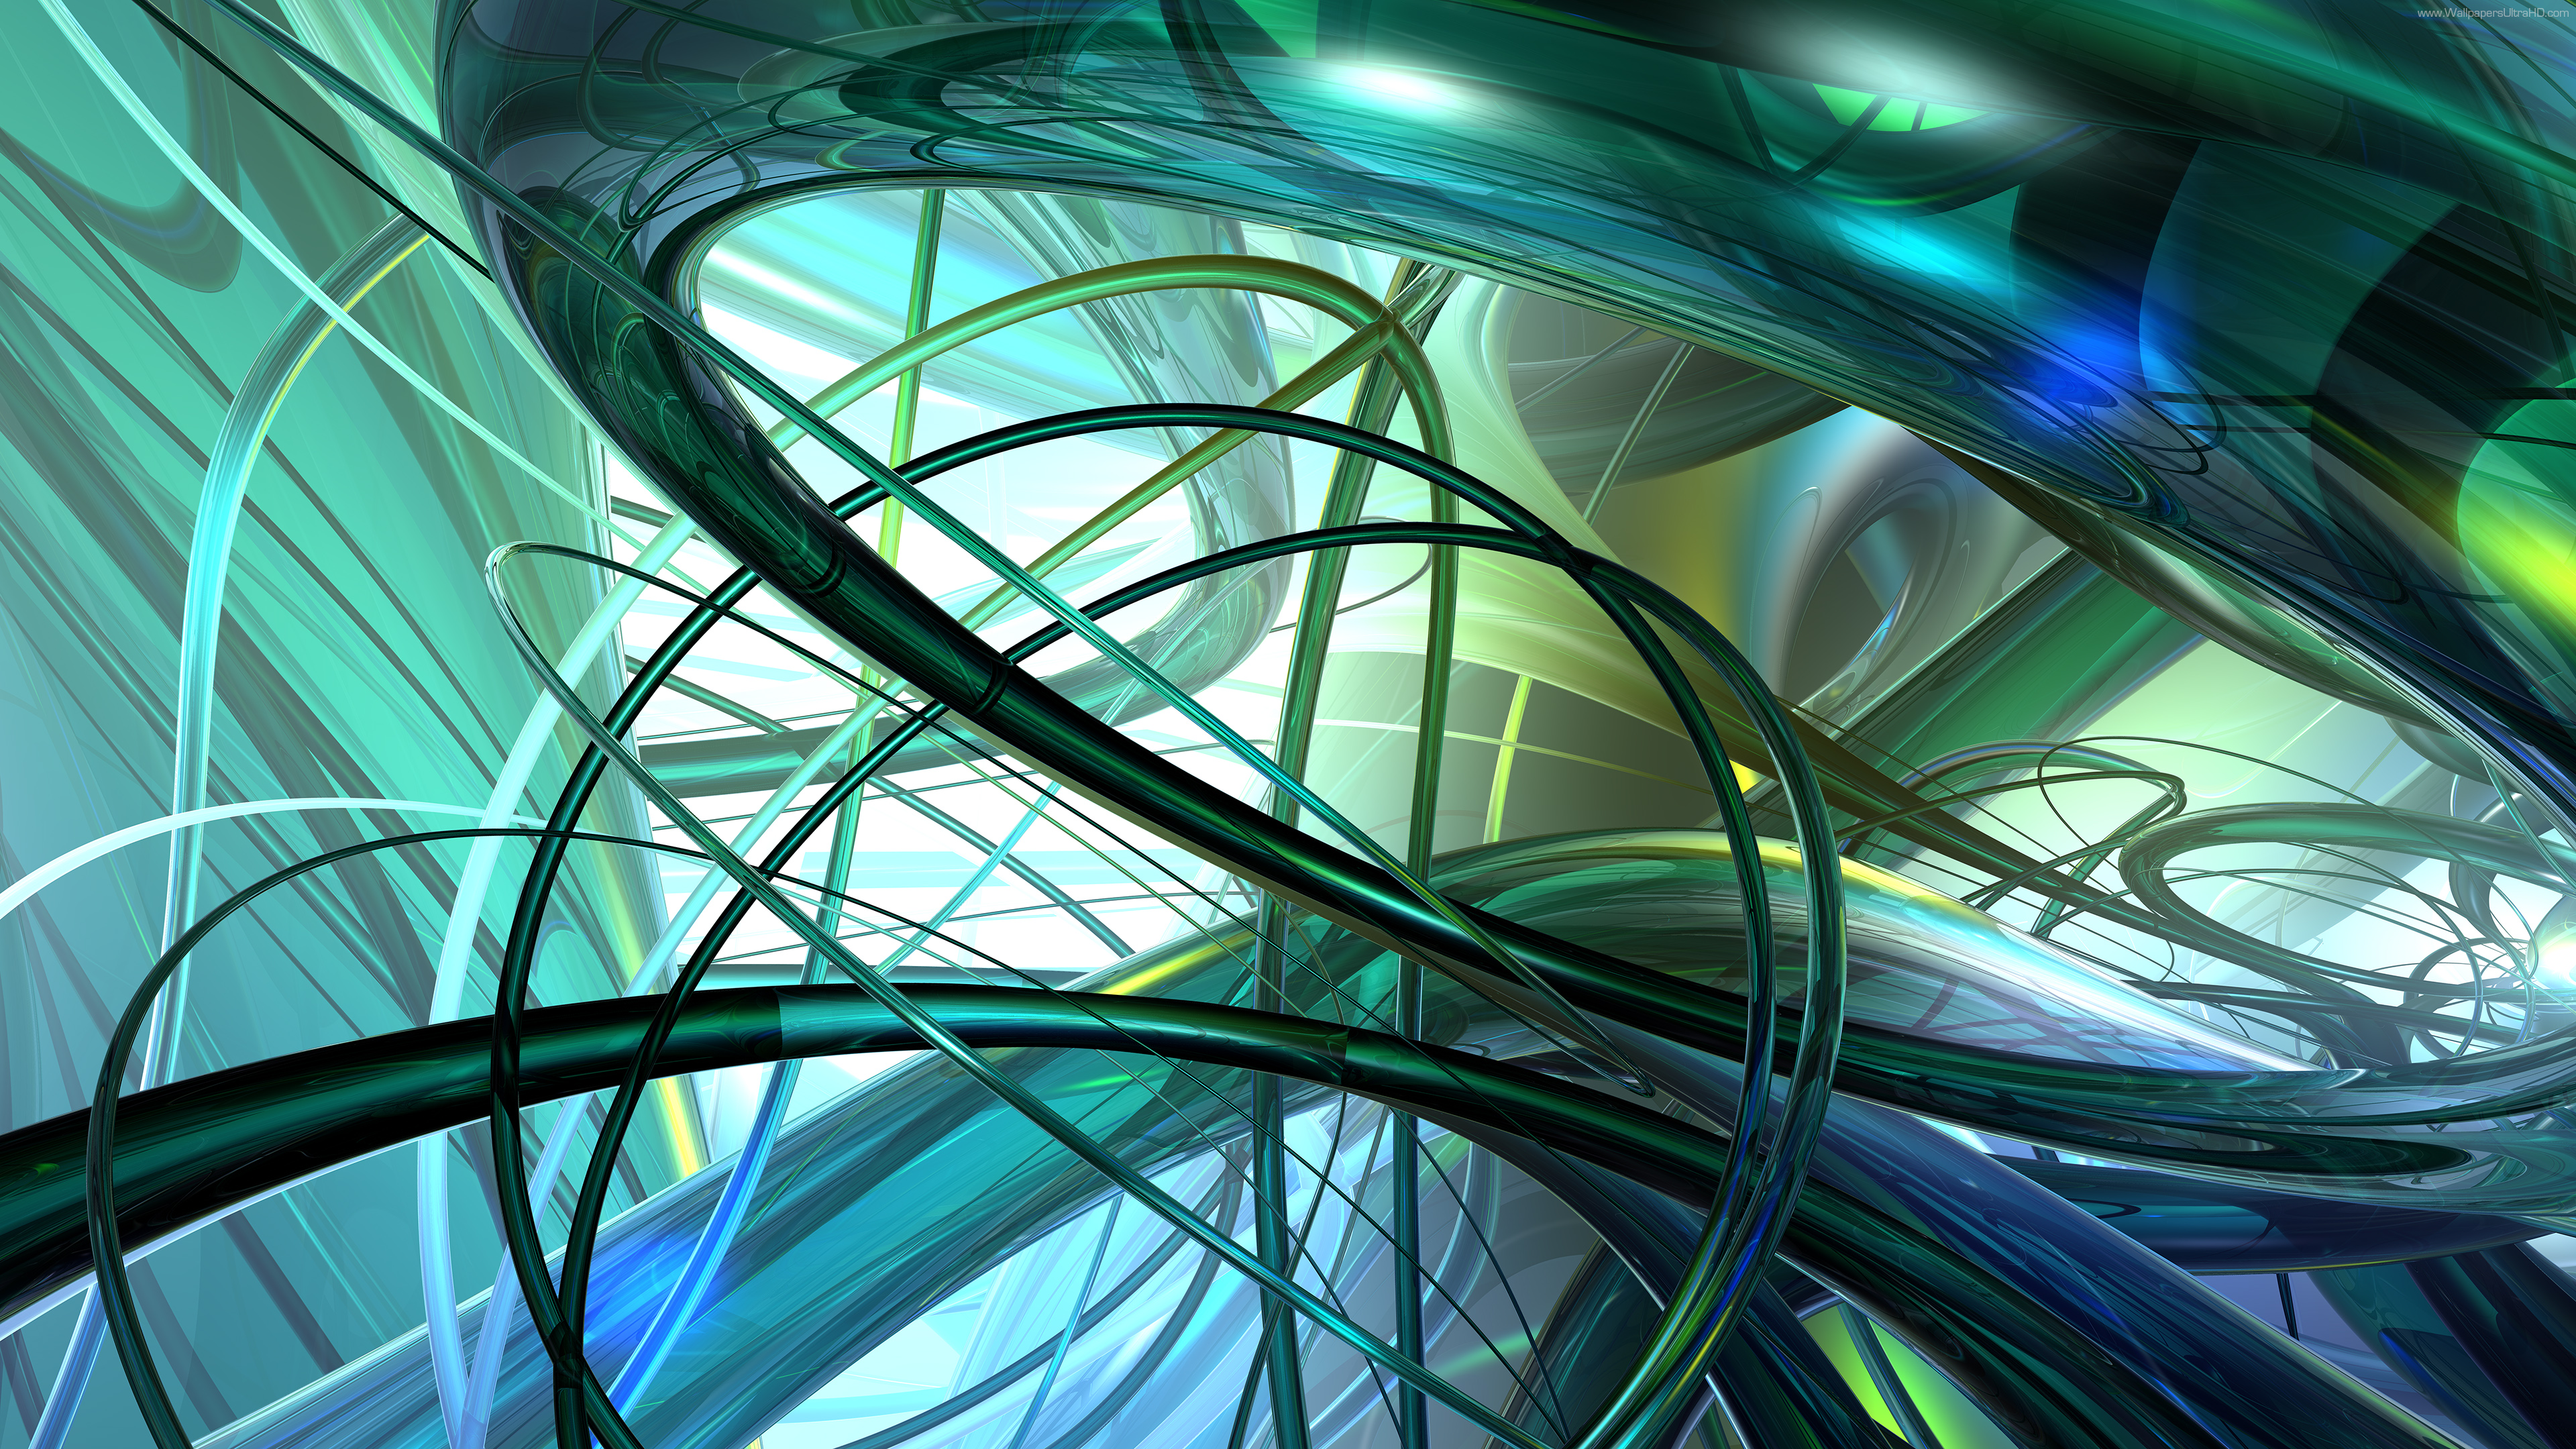 4k Abstract Wallpaper Themes HD 11725 - HD Wallpapers Site